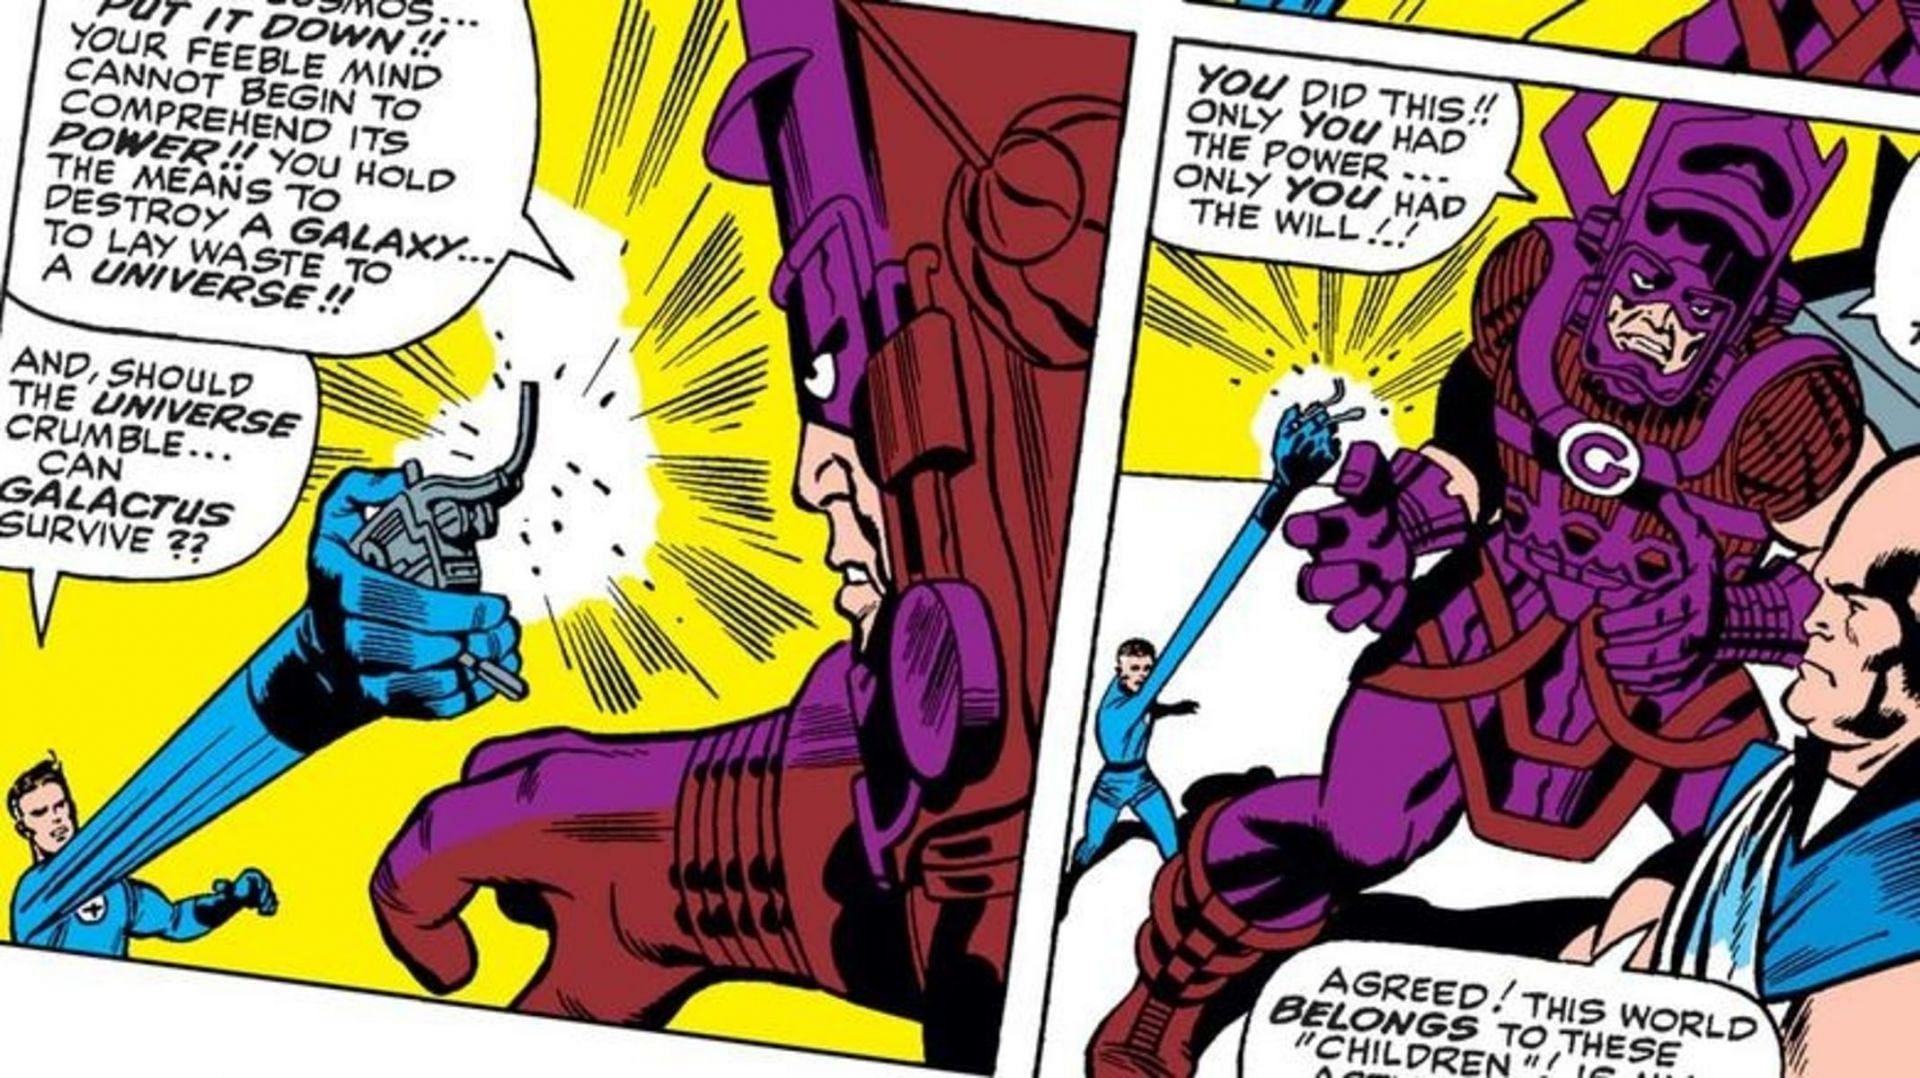 The Ultimate Nullifier in the comics (Image via Marvel)